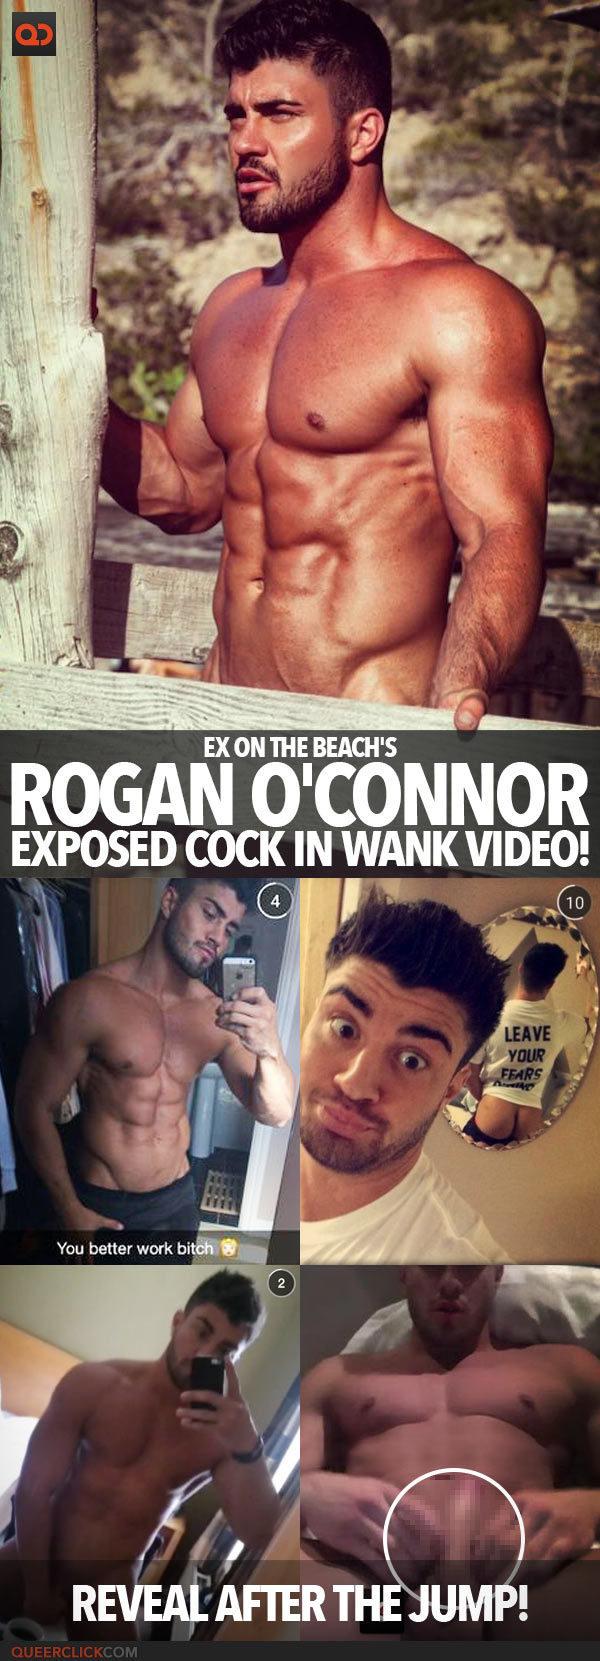 Ex On The Beach's Rogan O'Connor Exposed Cock In Wank Video!